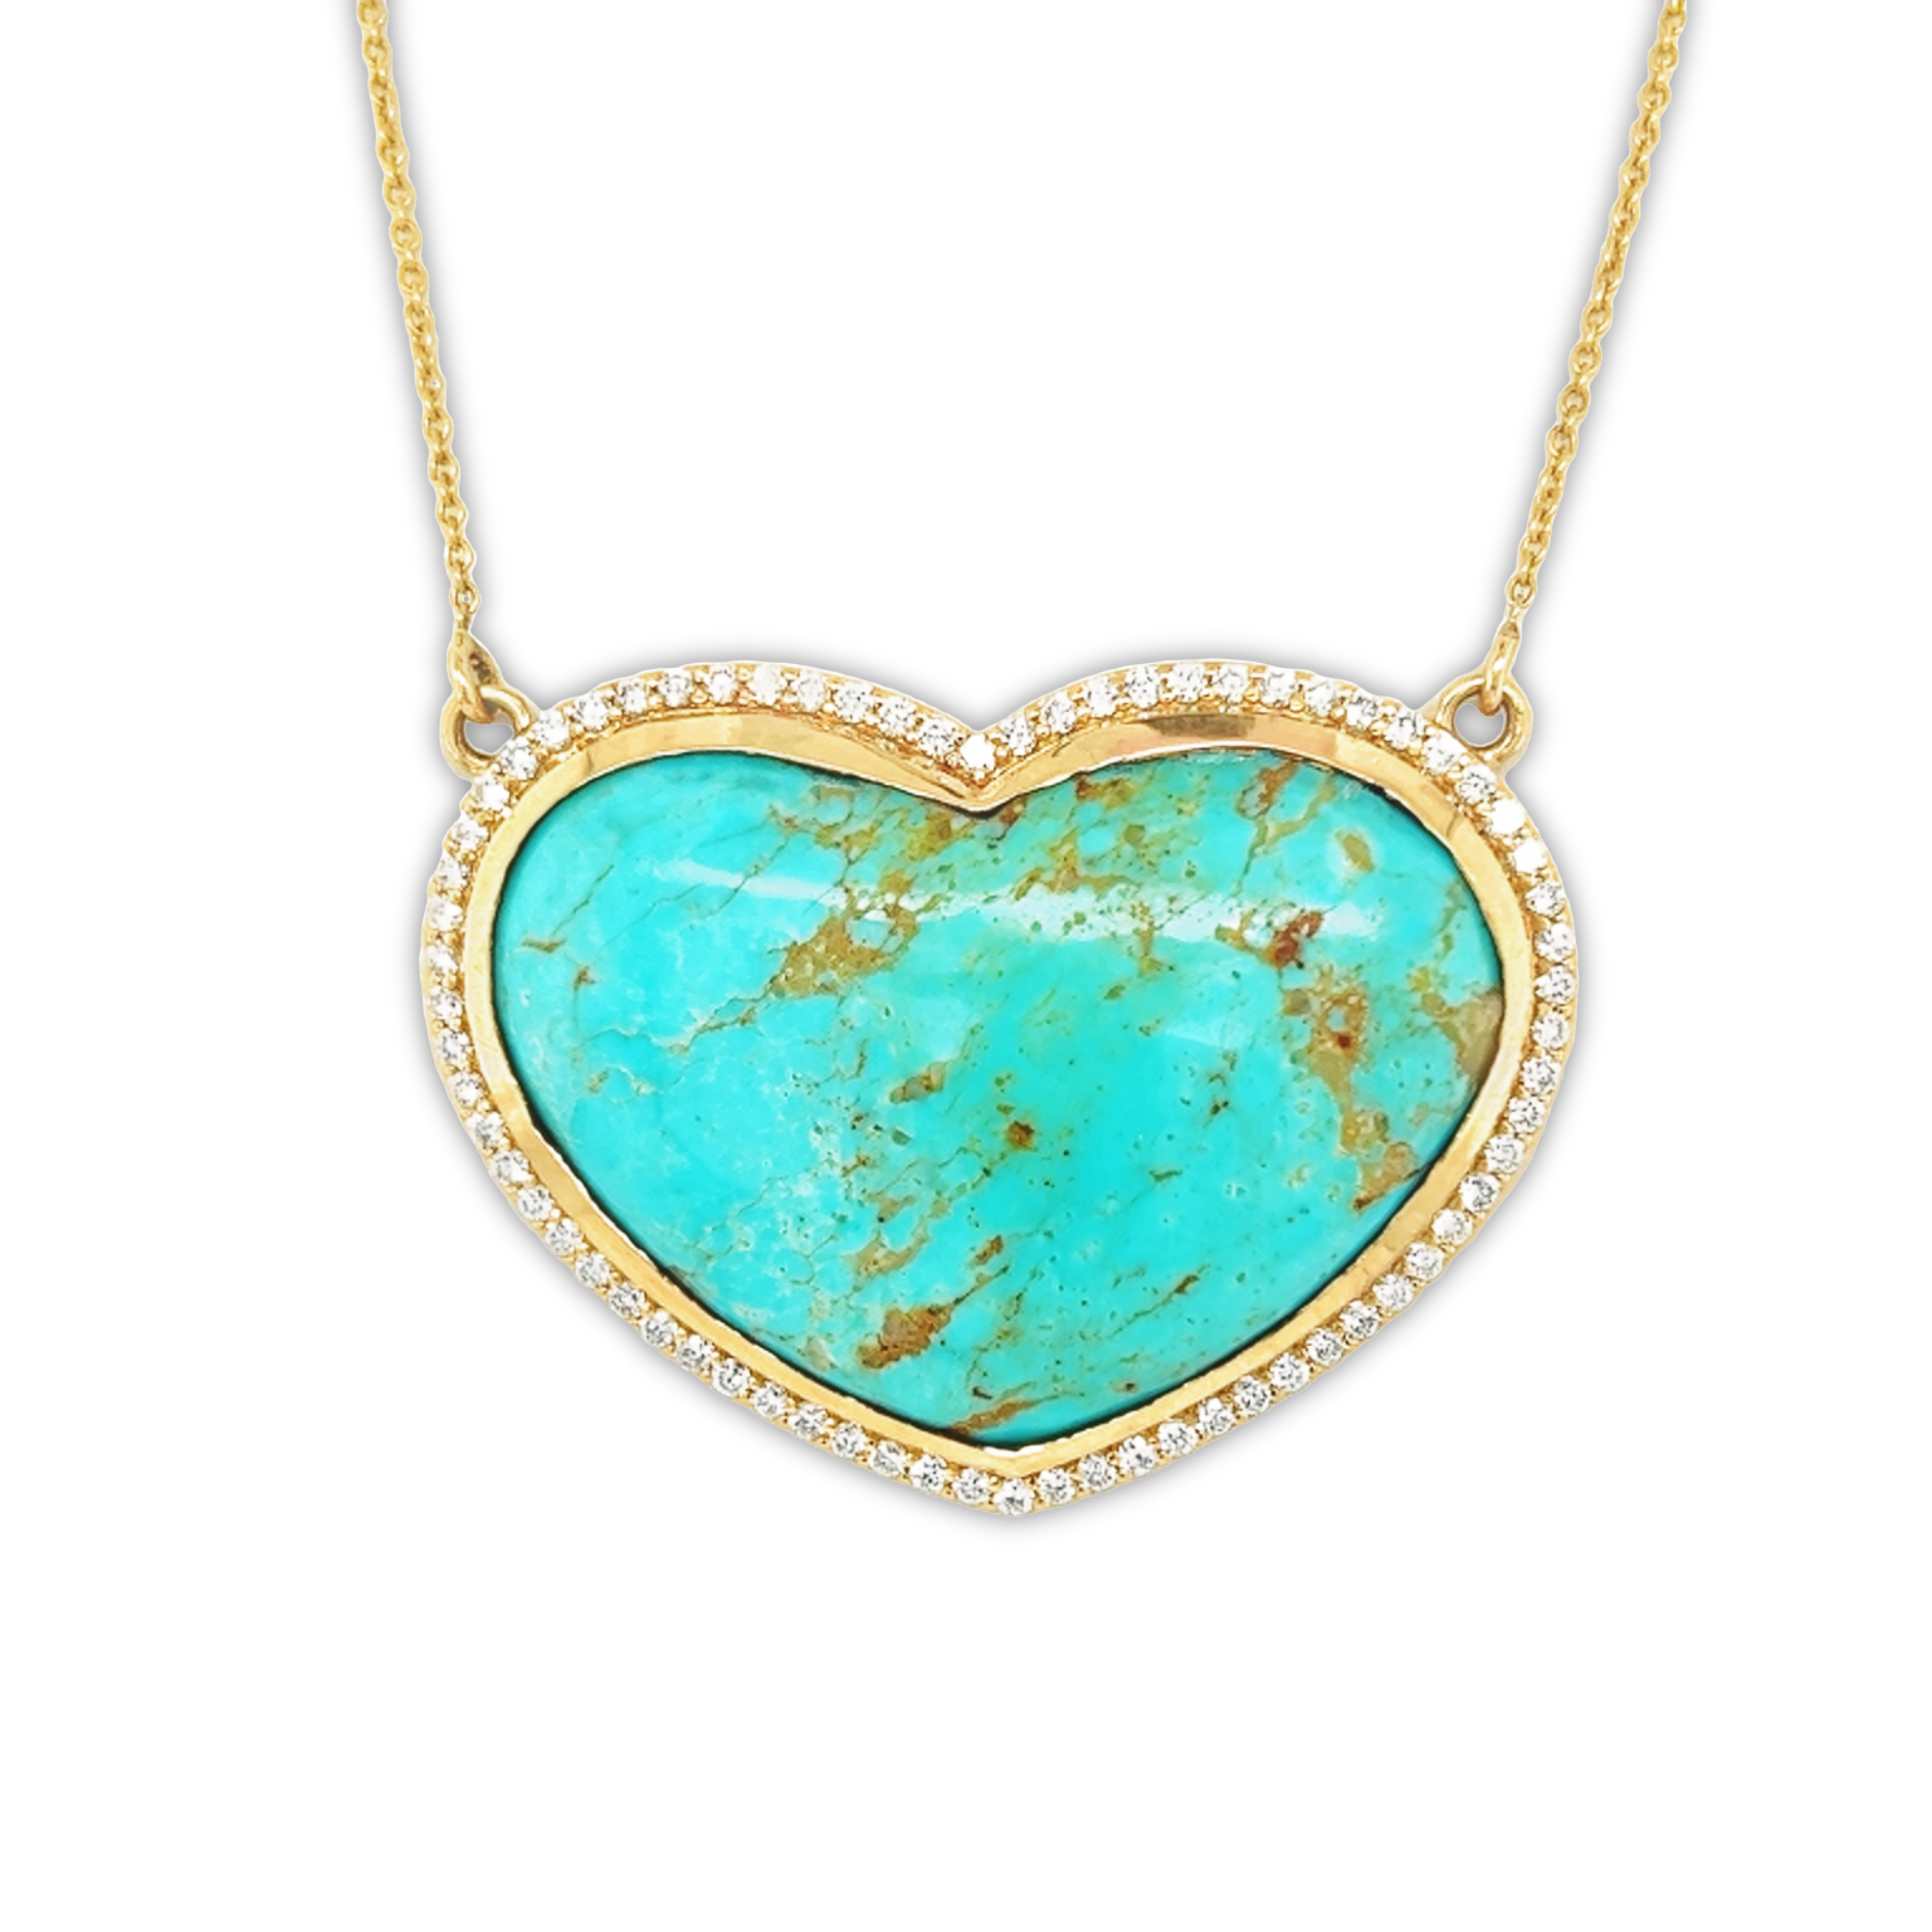 Featured image for “Statement Diamond  Bezeled Heart Necklace”